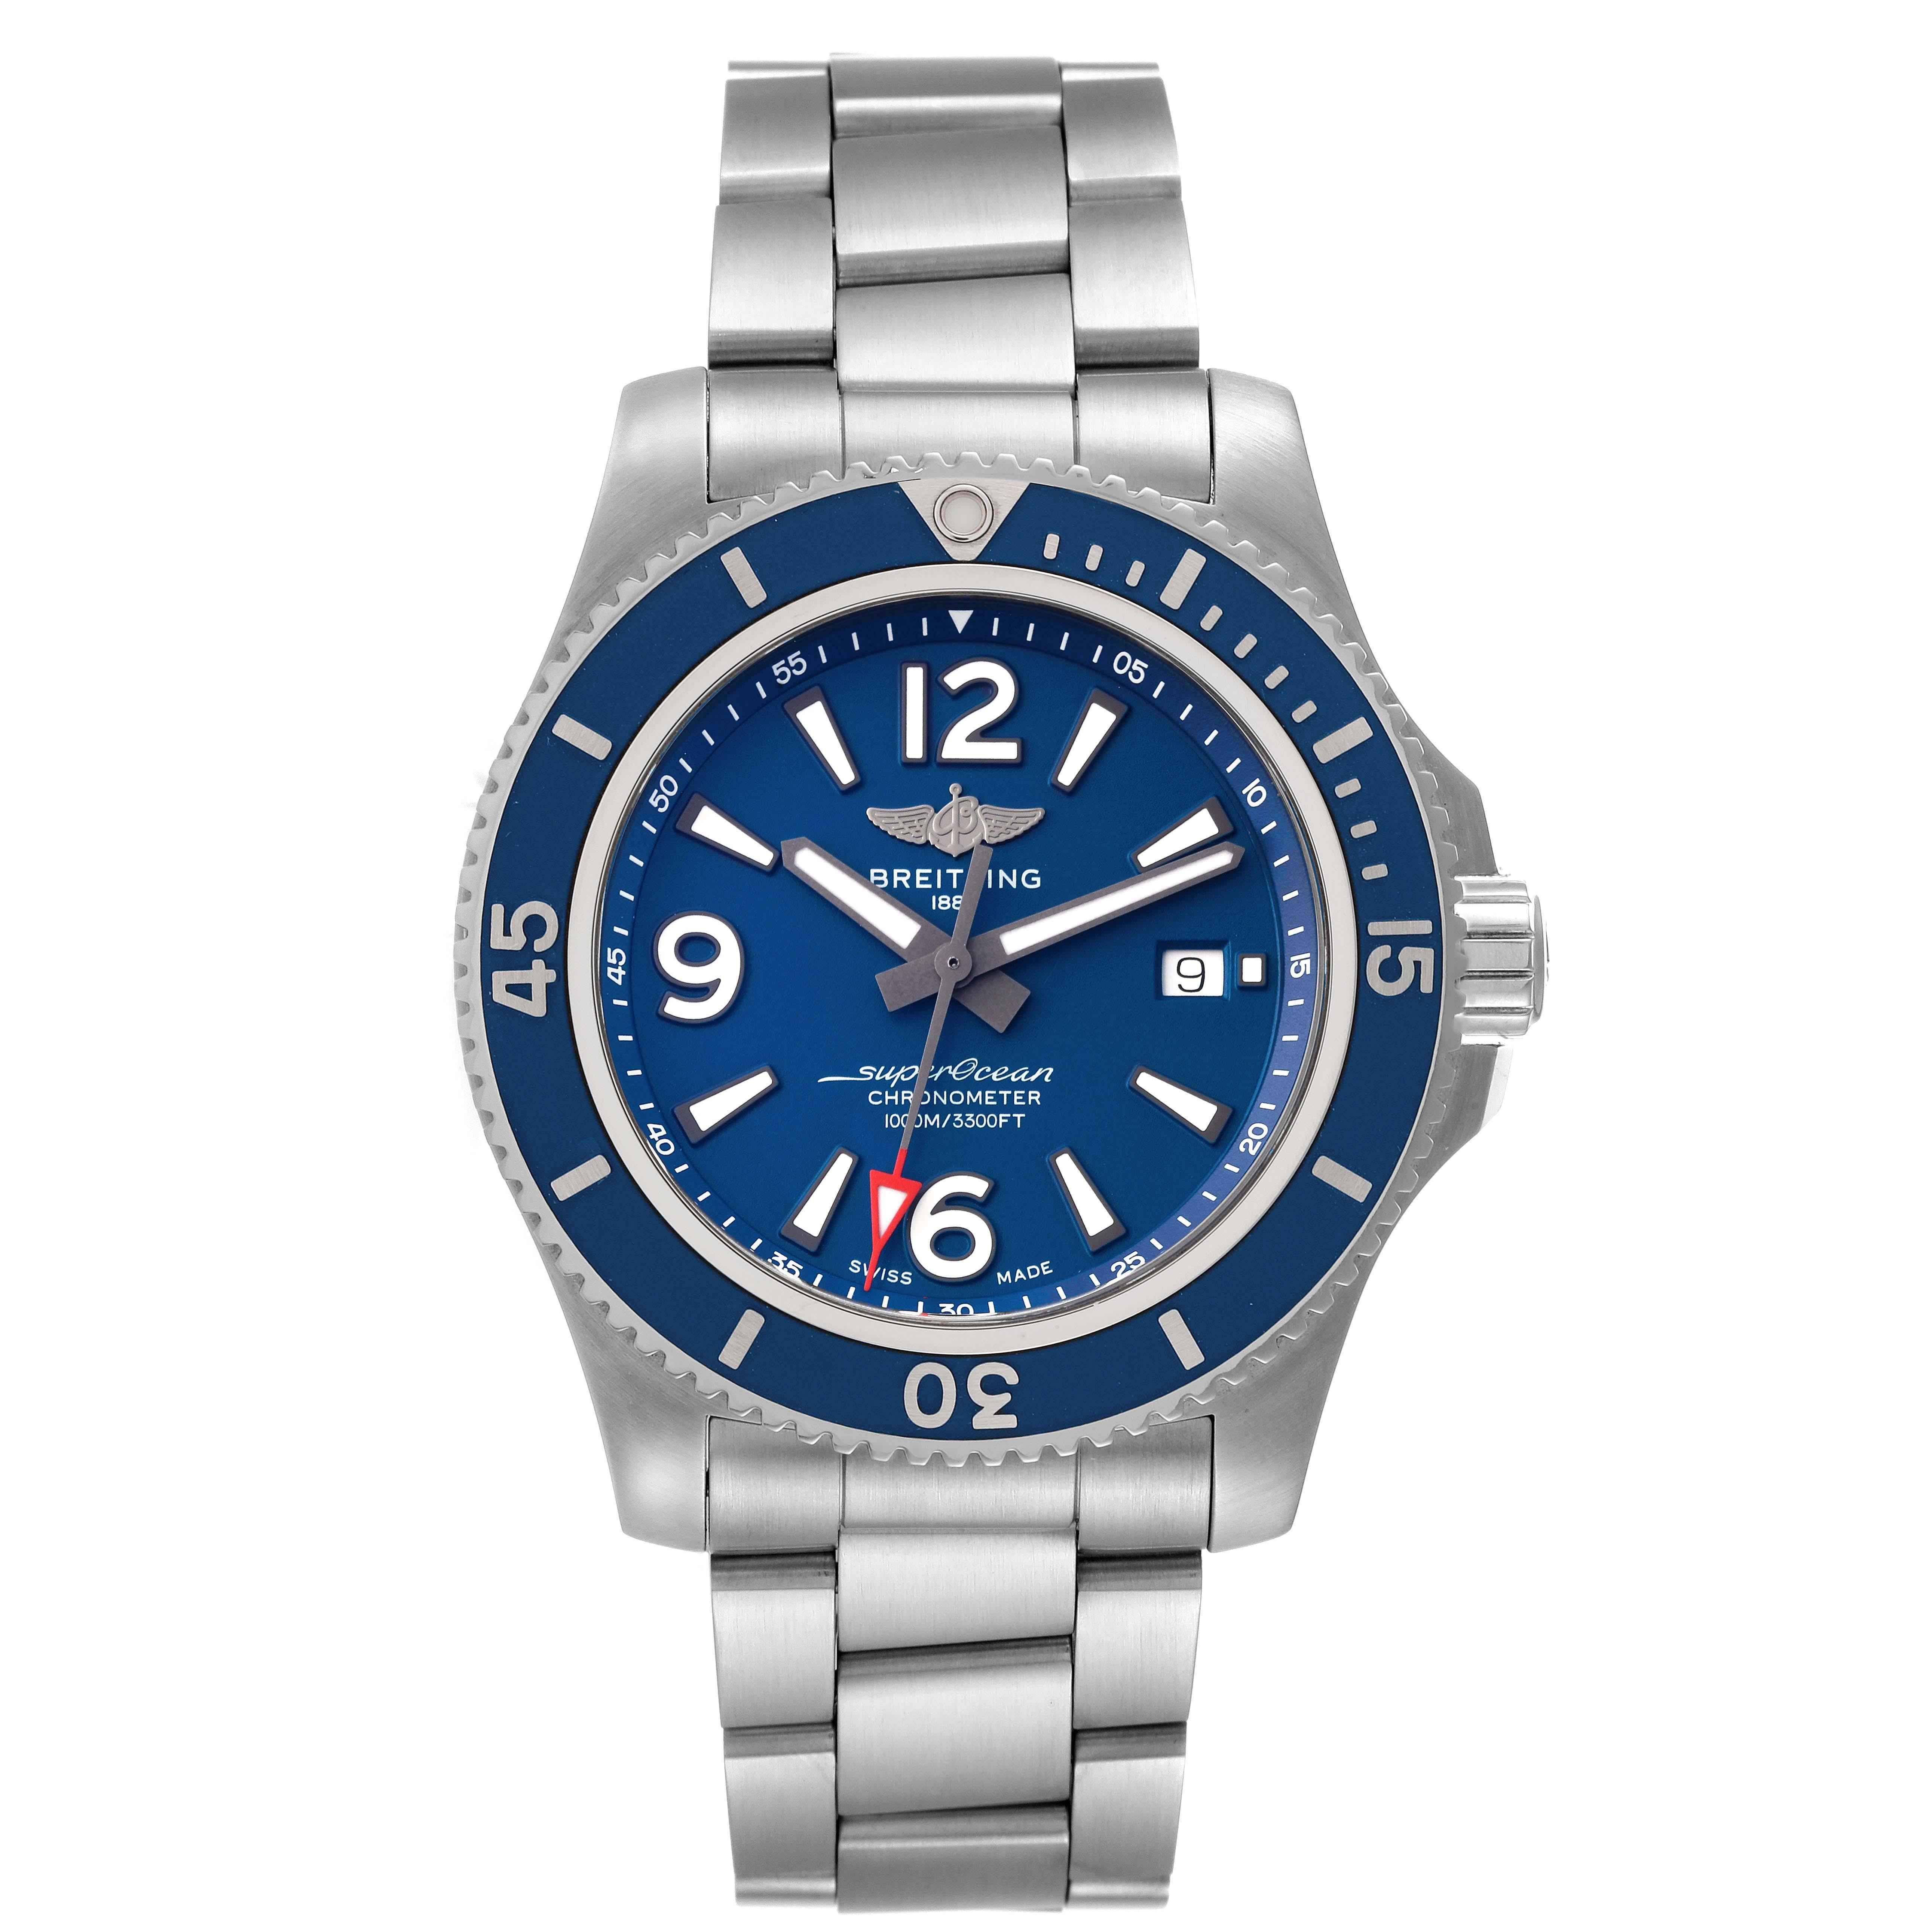 Breitling Superocean II Blue Dial Steel Mens Watch A17367. Automatic self-winding movement. Stainless steel case 44 mm in diameter. Stainless steel screwed-down crown and pushers. Blue unidirectional rotating bezel. 0-60 elapsed-time. Scratch